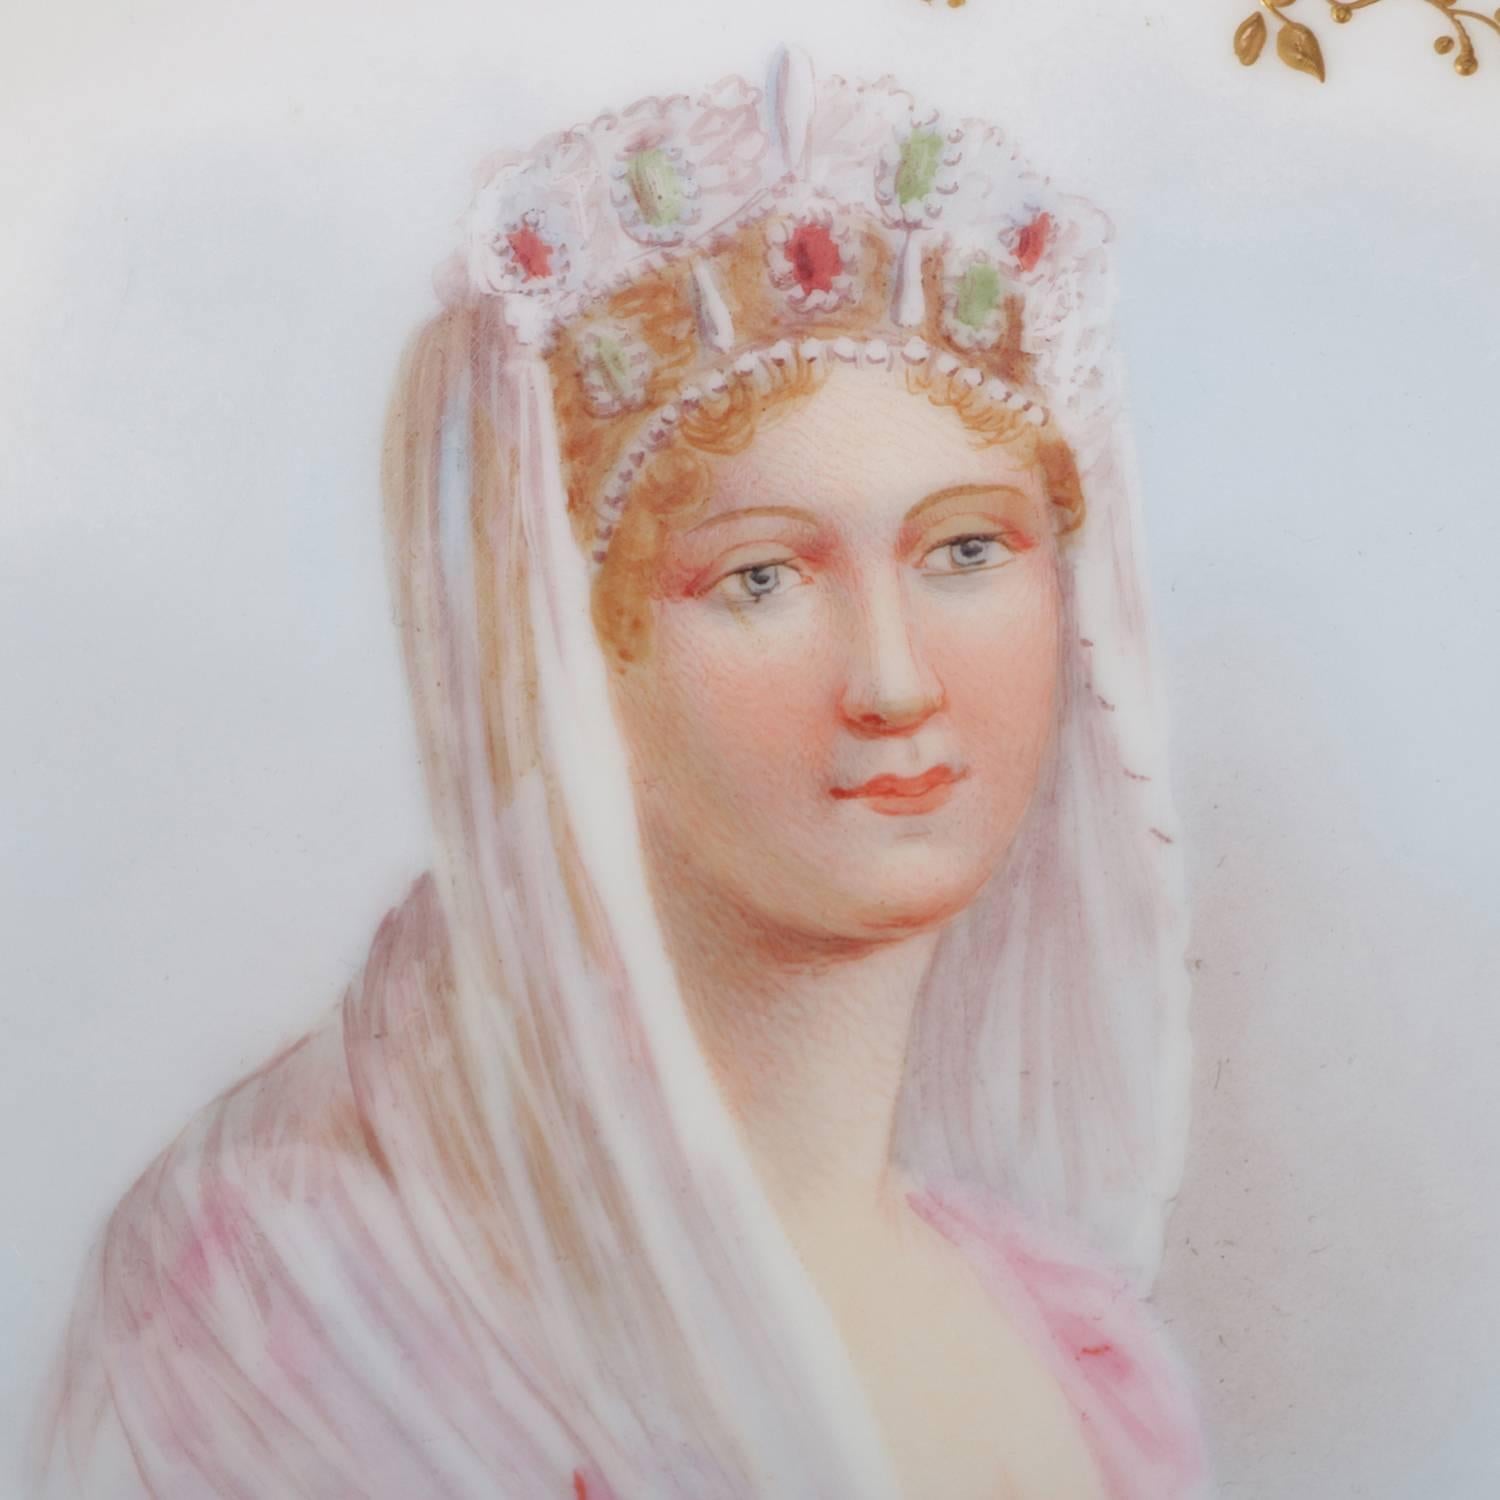 Antique French Sevres porcelain hand-painted porcelain portrait plate features central portrait of crowned princess artist signed lower right, scalloped border with floral reserves and gilt foliate and scroll accents, en verso with 